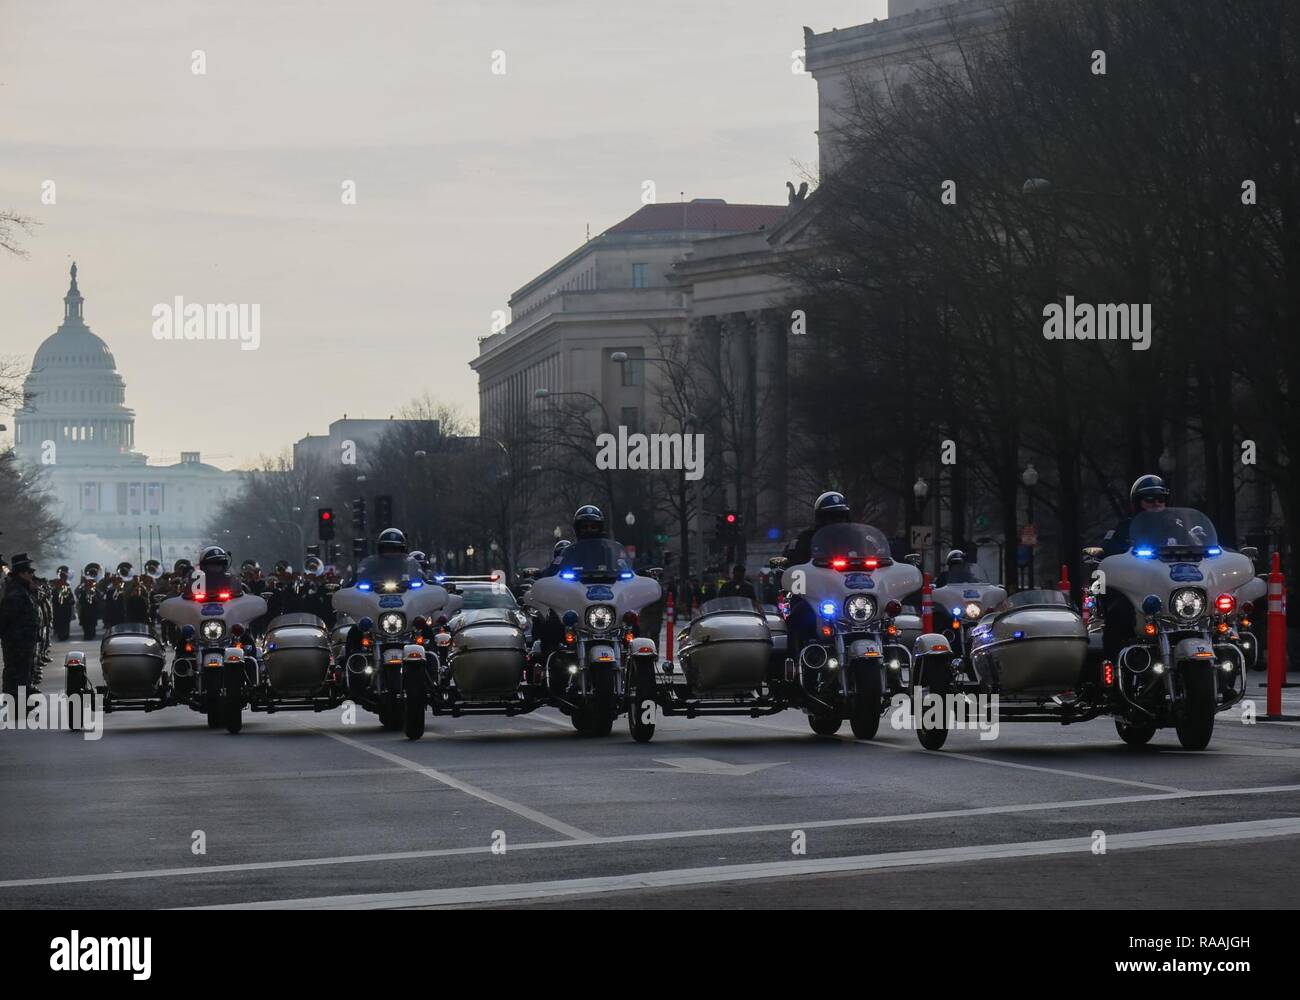 Members of the District of Columbia Metropolitian Police drive down Pennsylvania Avenue during the Department of Defense Dress Rehearsal for the 58th Presidential Inauguration, Washington, D.C., Jan. 15, 2017. More than 5,000 military members from across all branches of the armed forces of the United States, including Reserve and National Guard components, provided ceremonial support and Defense Support of Civil Authorities during the inaugural period. Stock Photo